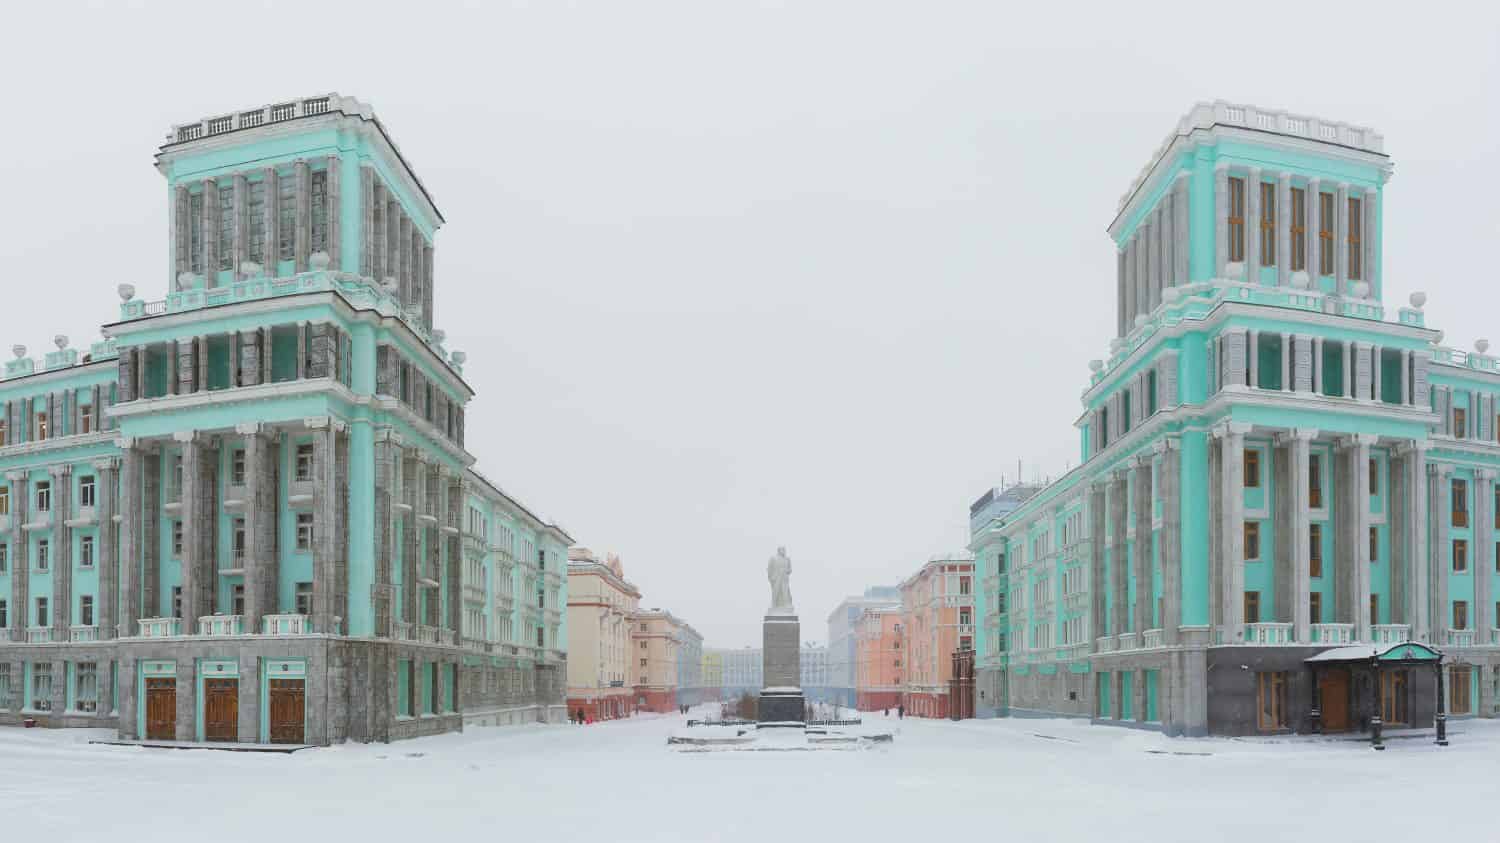 Panorama of October Square in the Norilsk city. Beautiful buildings in the architectural style of the Soviet neo-classicism. In the center is a monument to Vladimir Lenin. Krasnoyarsk region, Russia.